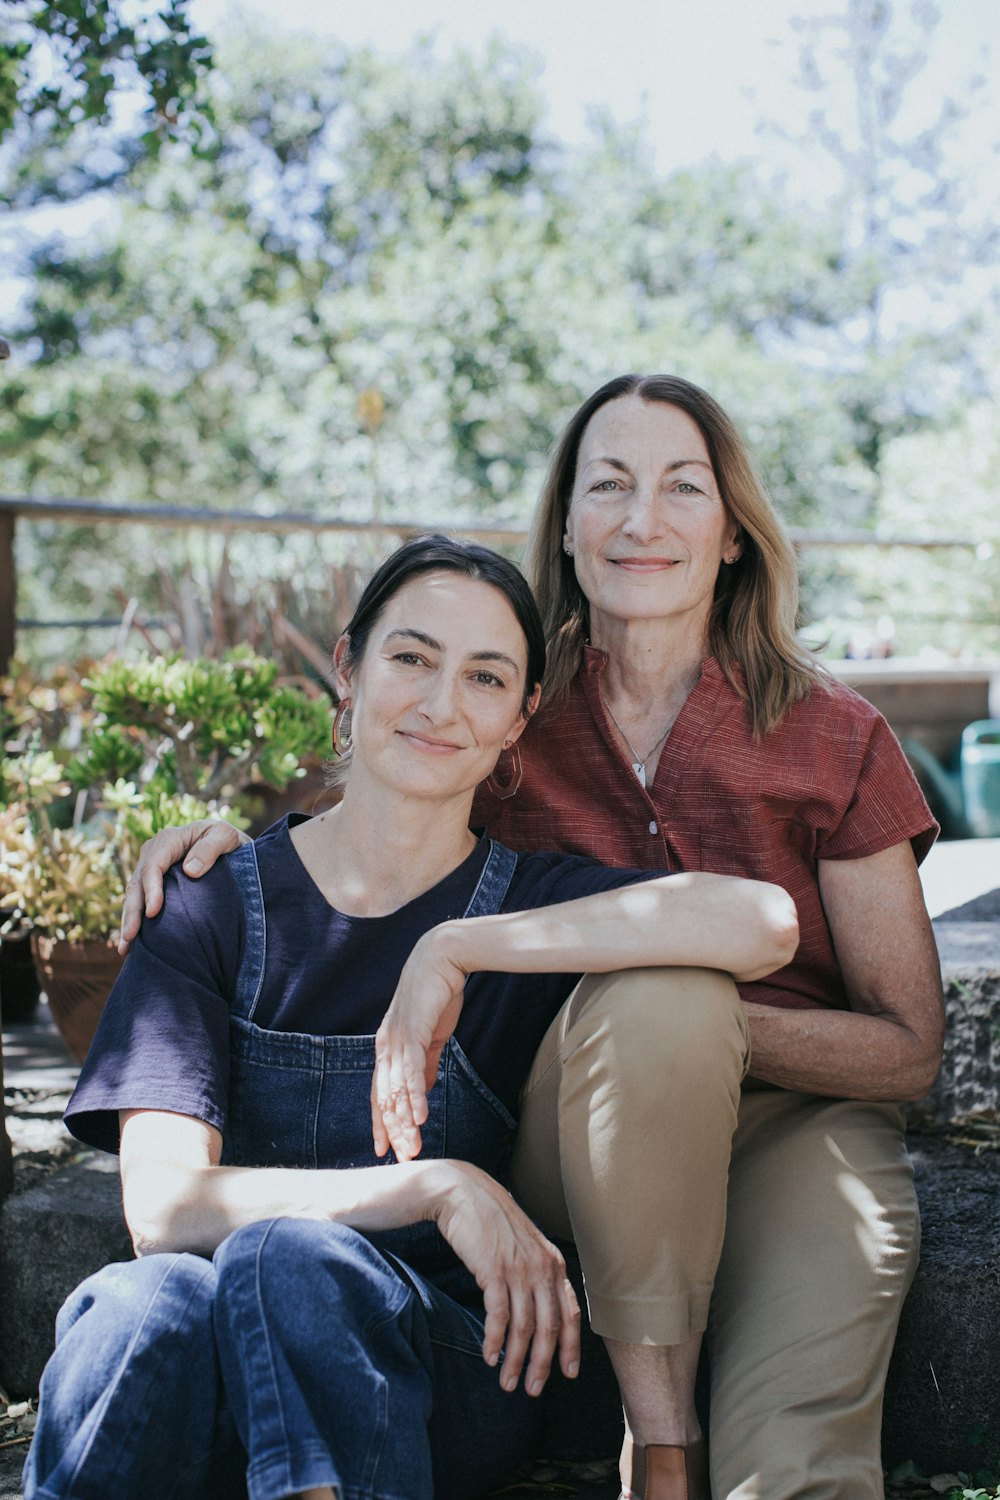 Cosmic View founders Nicole Skibola and her mother Dr. Christine Skibola